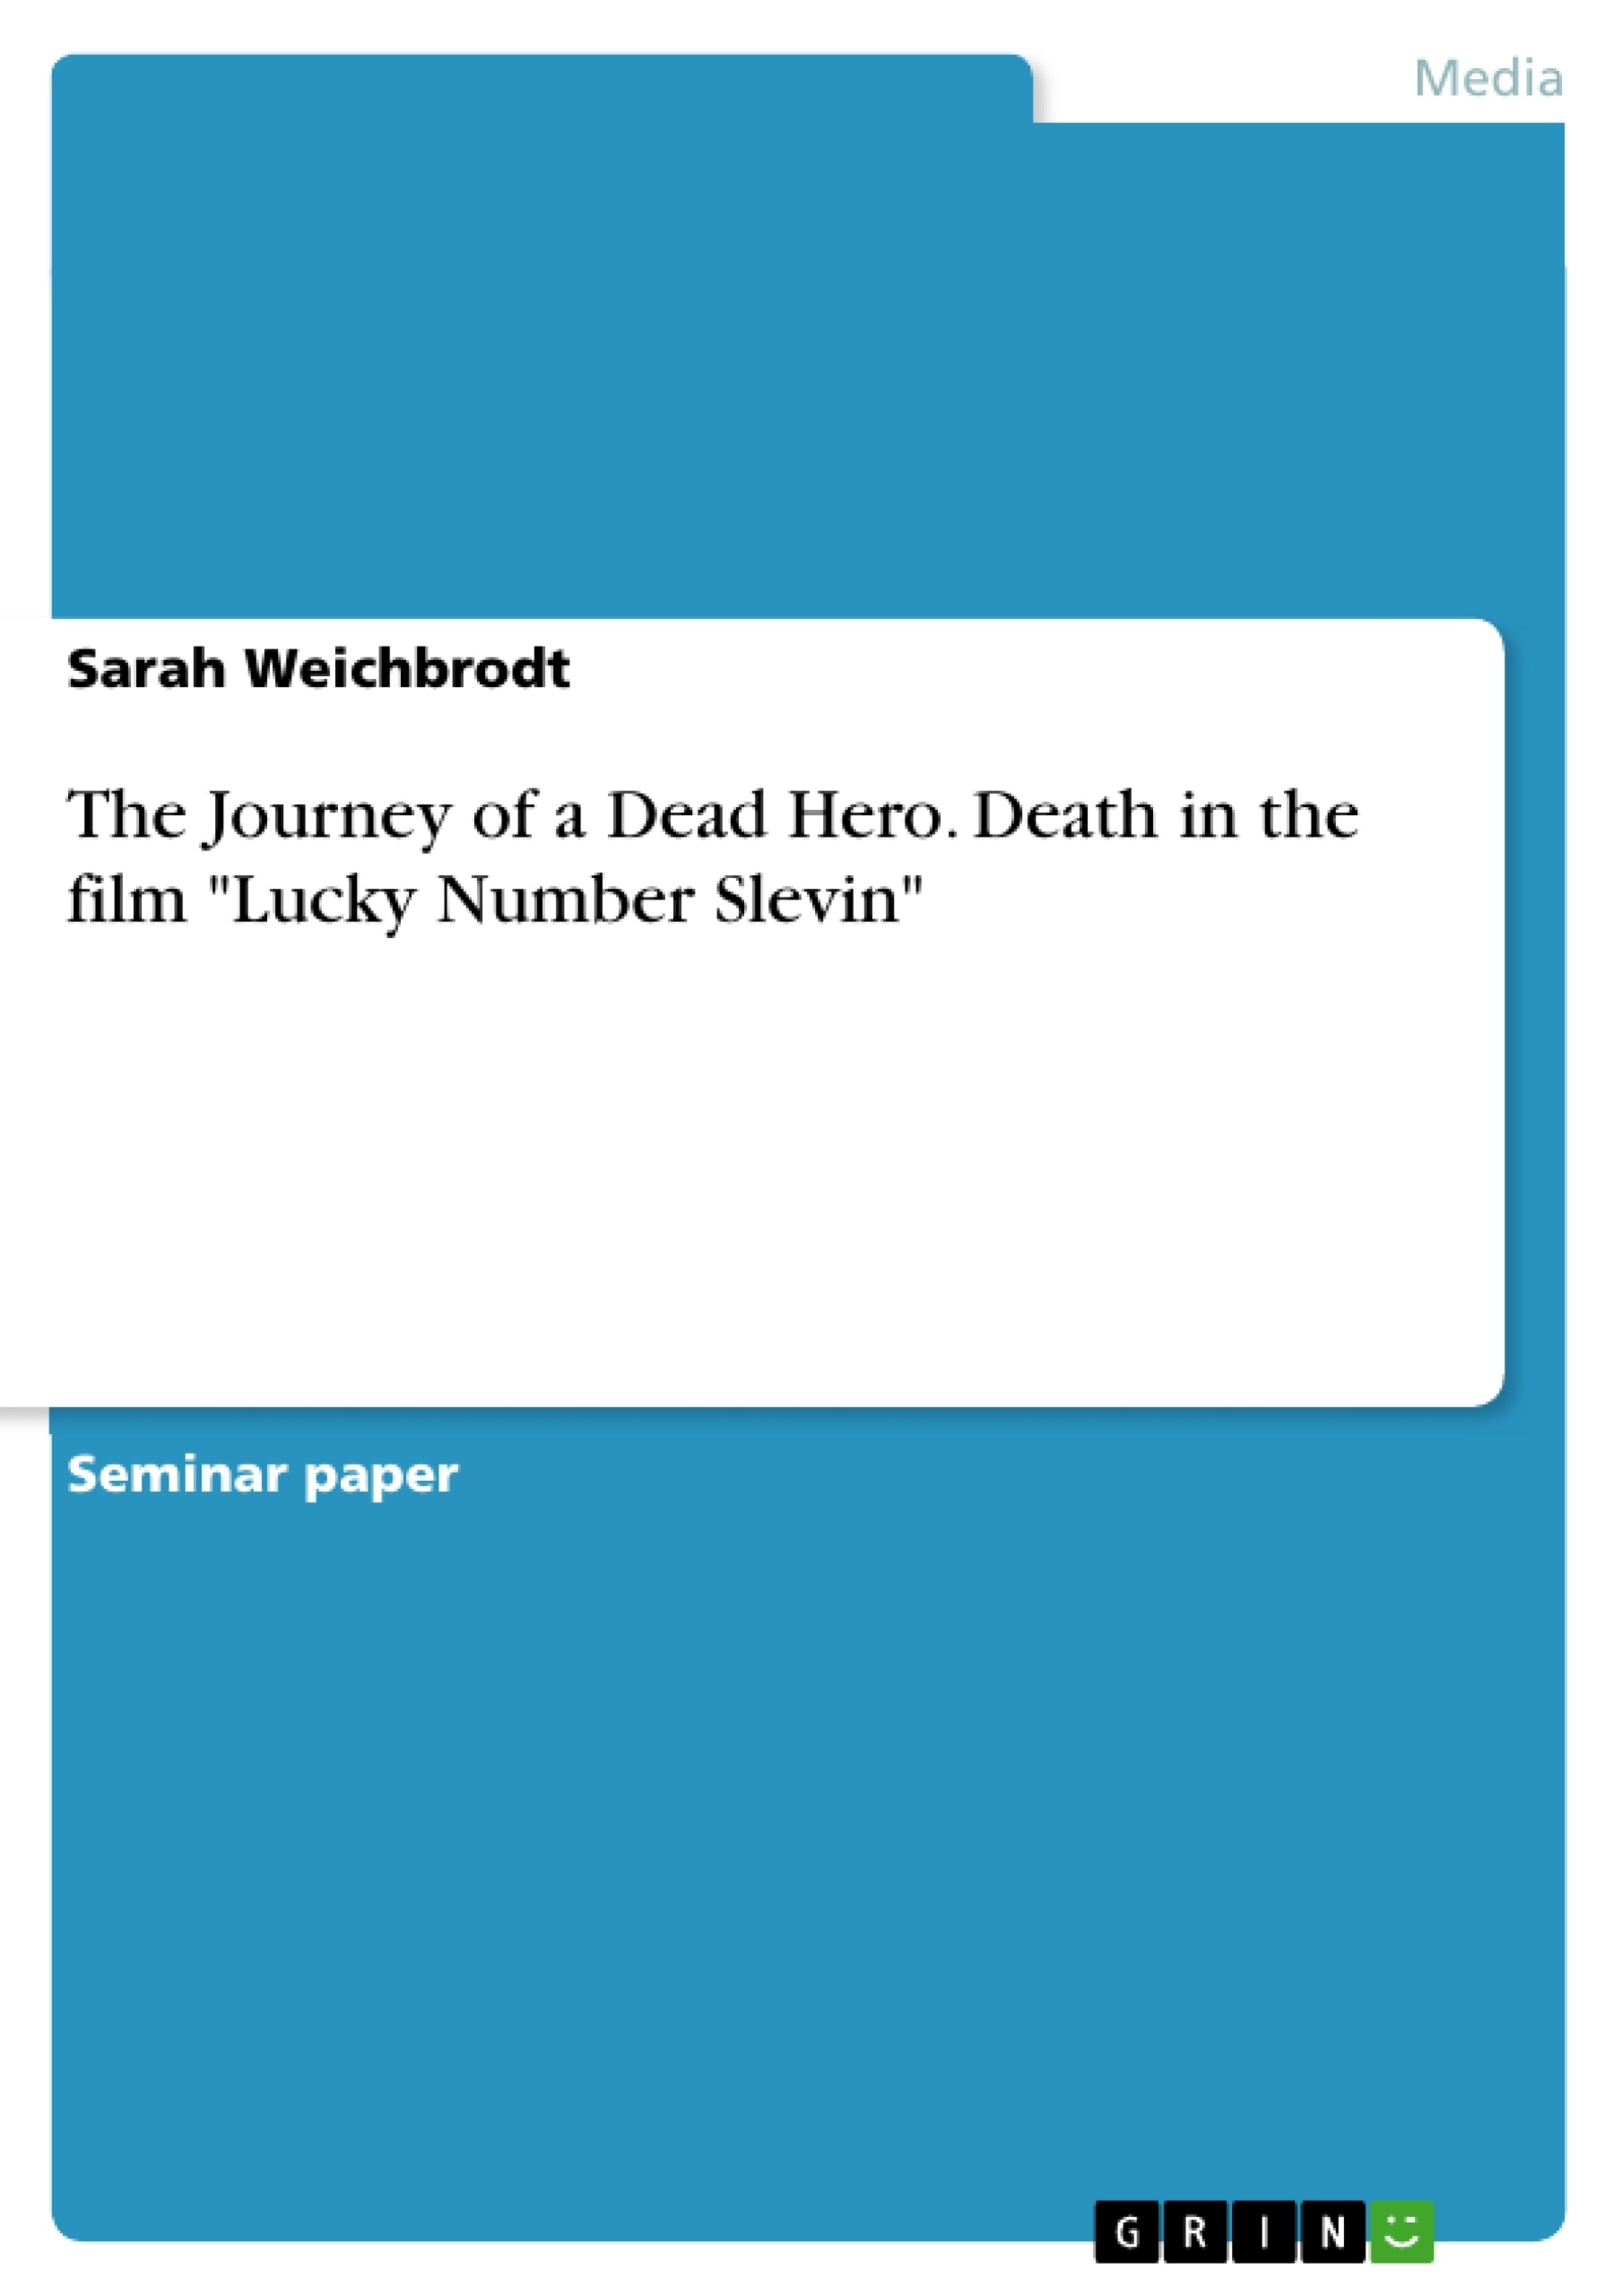 Title: The Journey of a Dead Hero. Death in the film "Lucky Number Slevin"